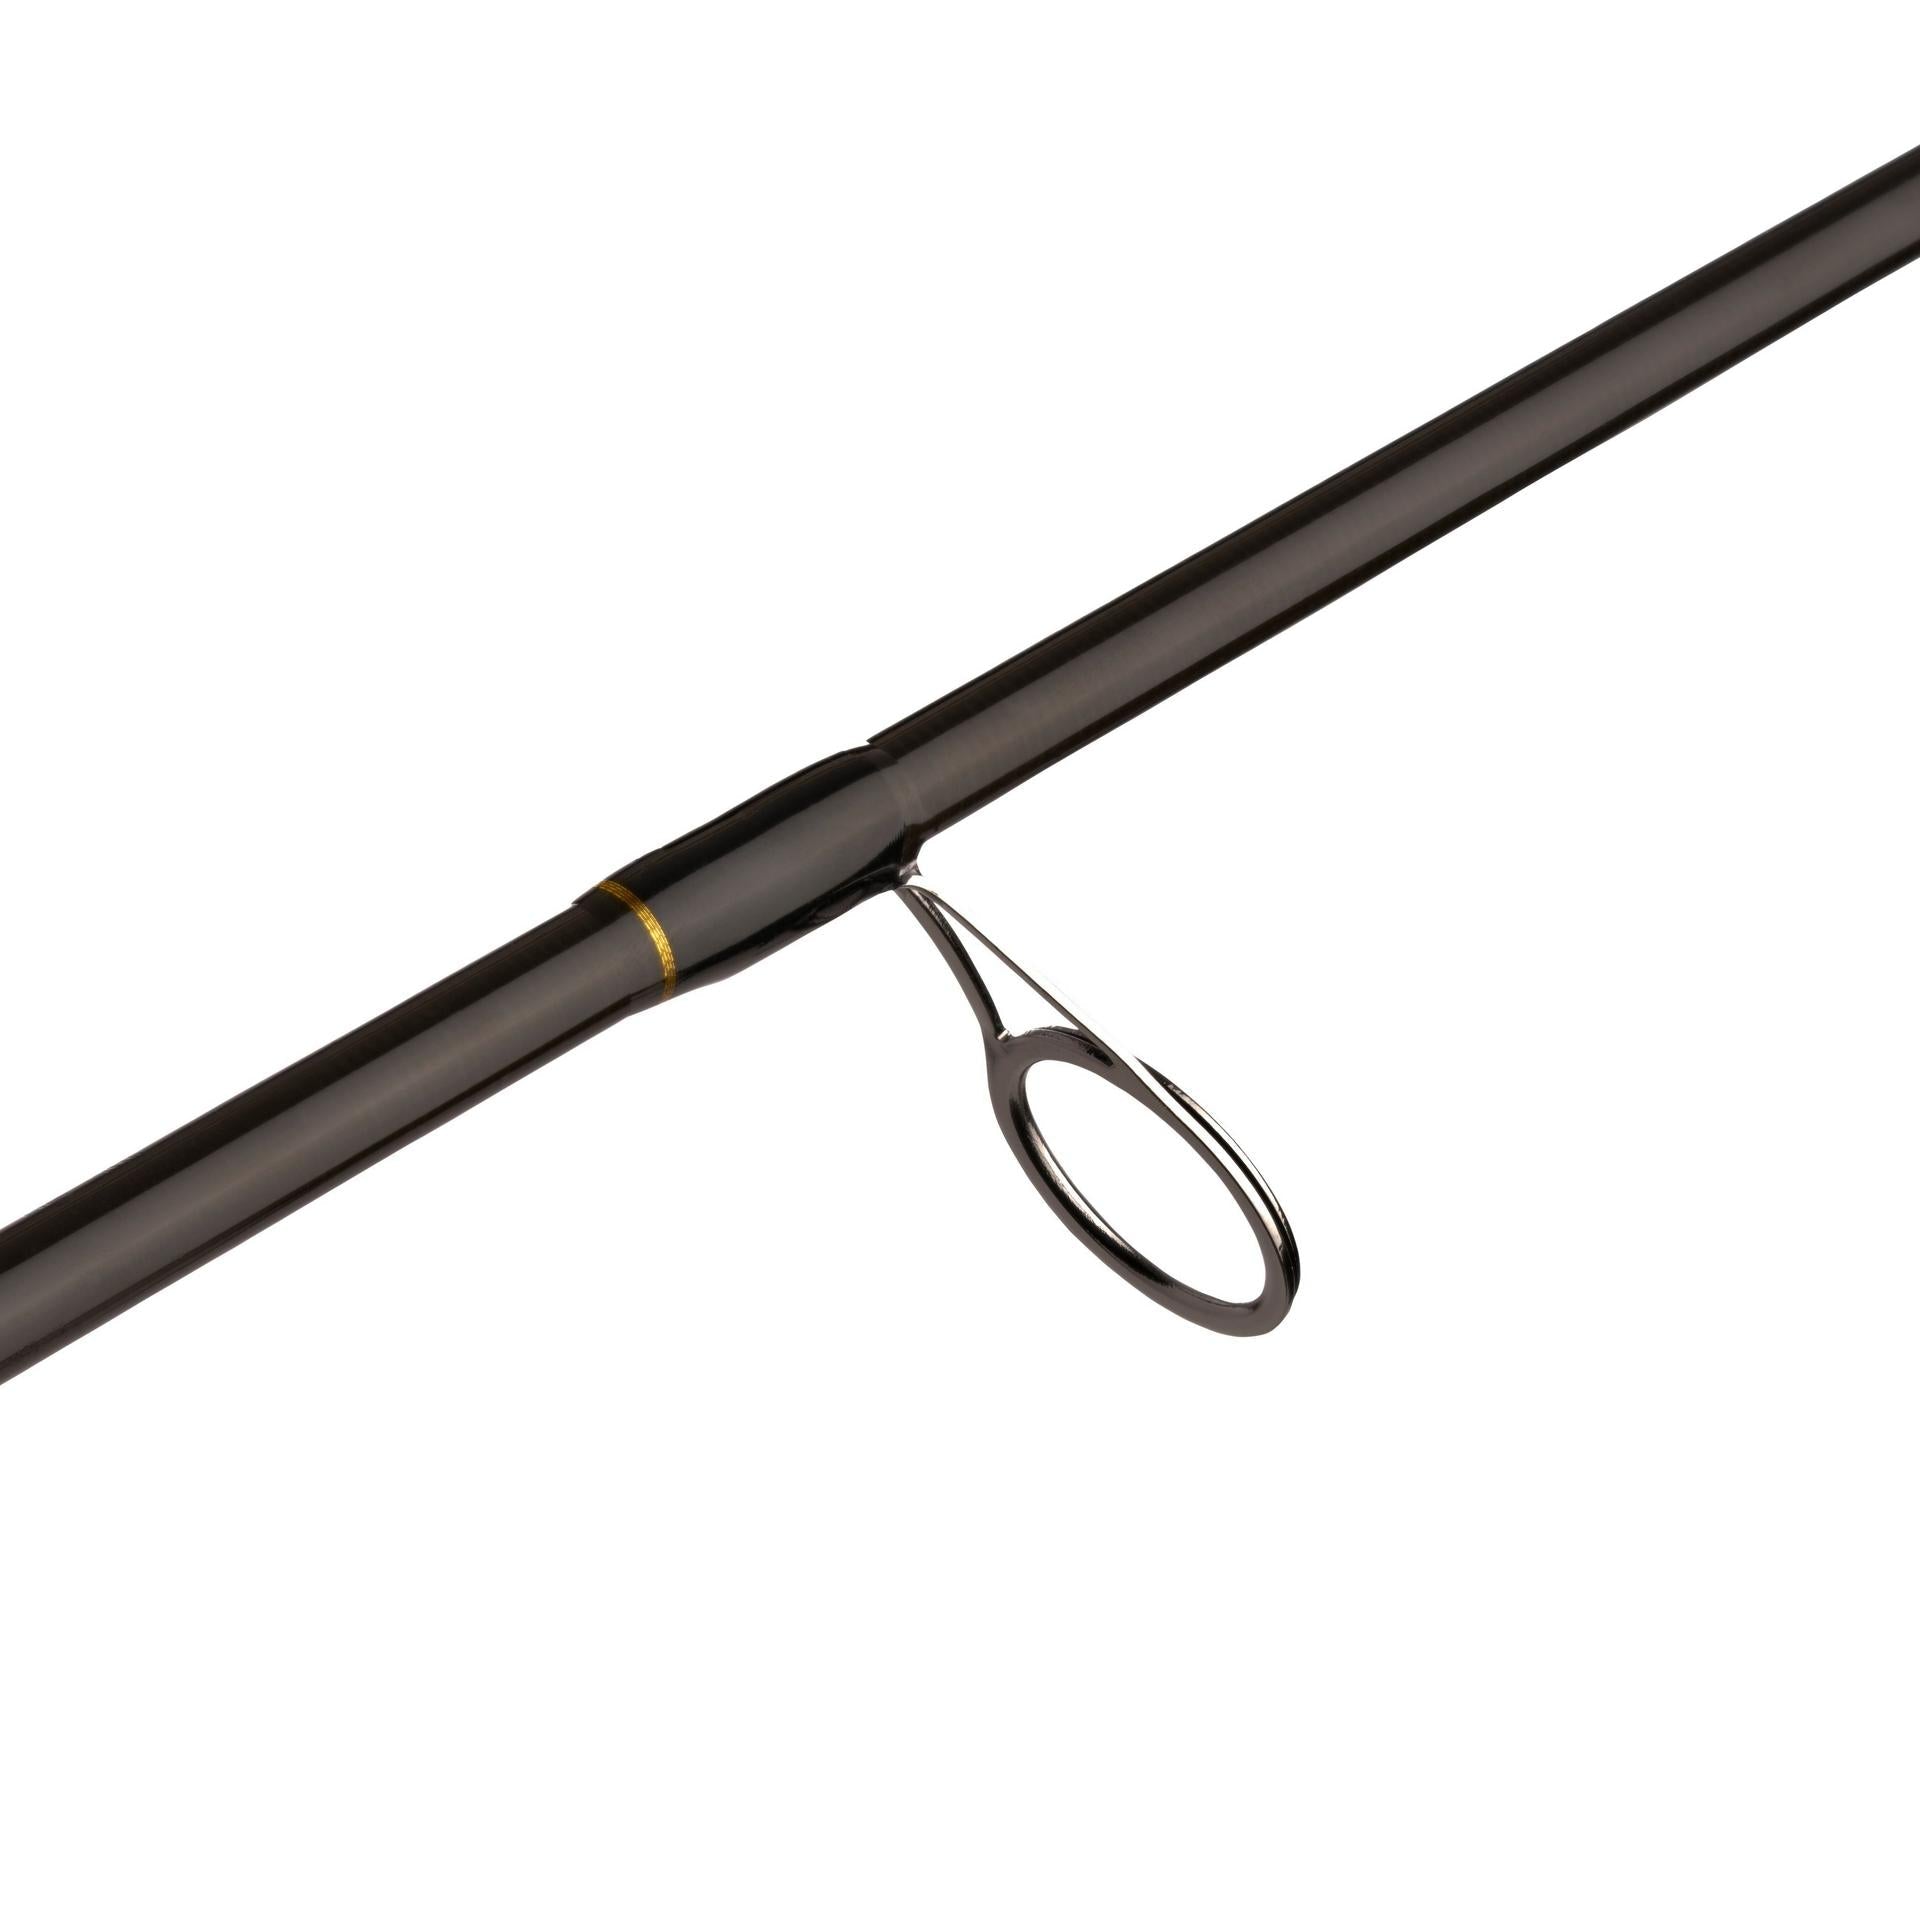 Penn Spinfisher VII Combo 4500 with 7' M 1-Piece Spin Combo - SSVII4500701M  from PENN - CHAOS Fishing